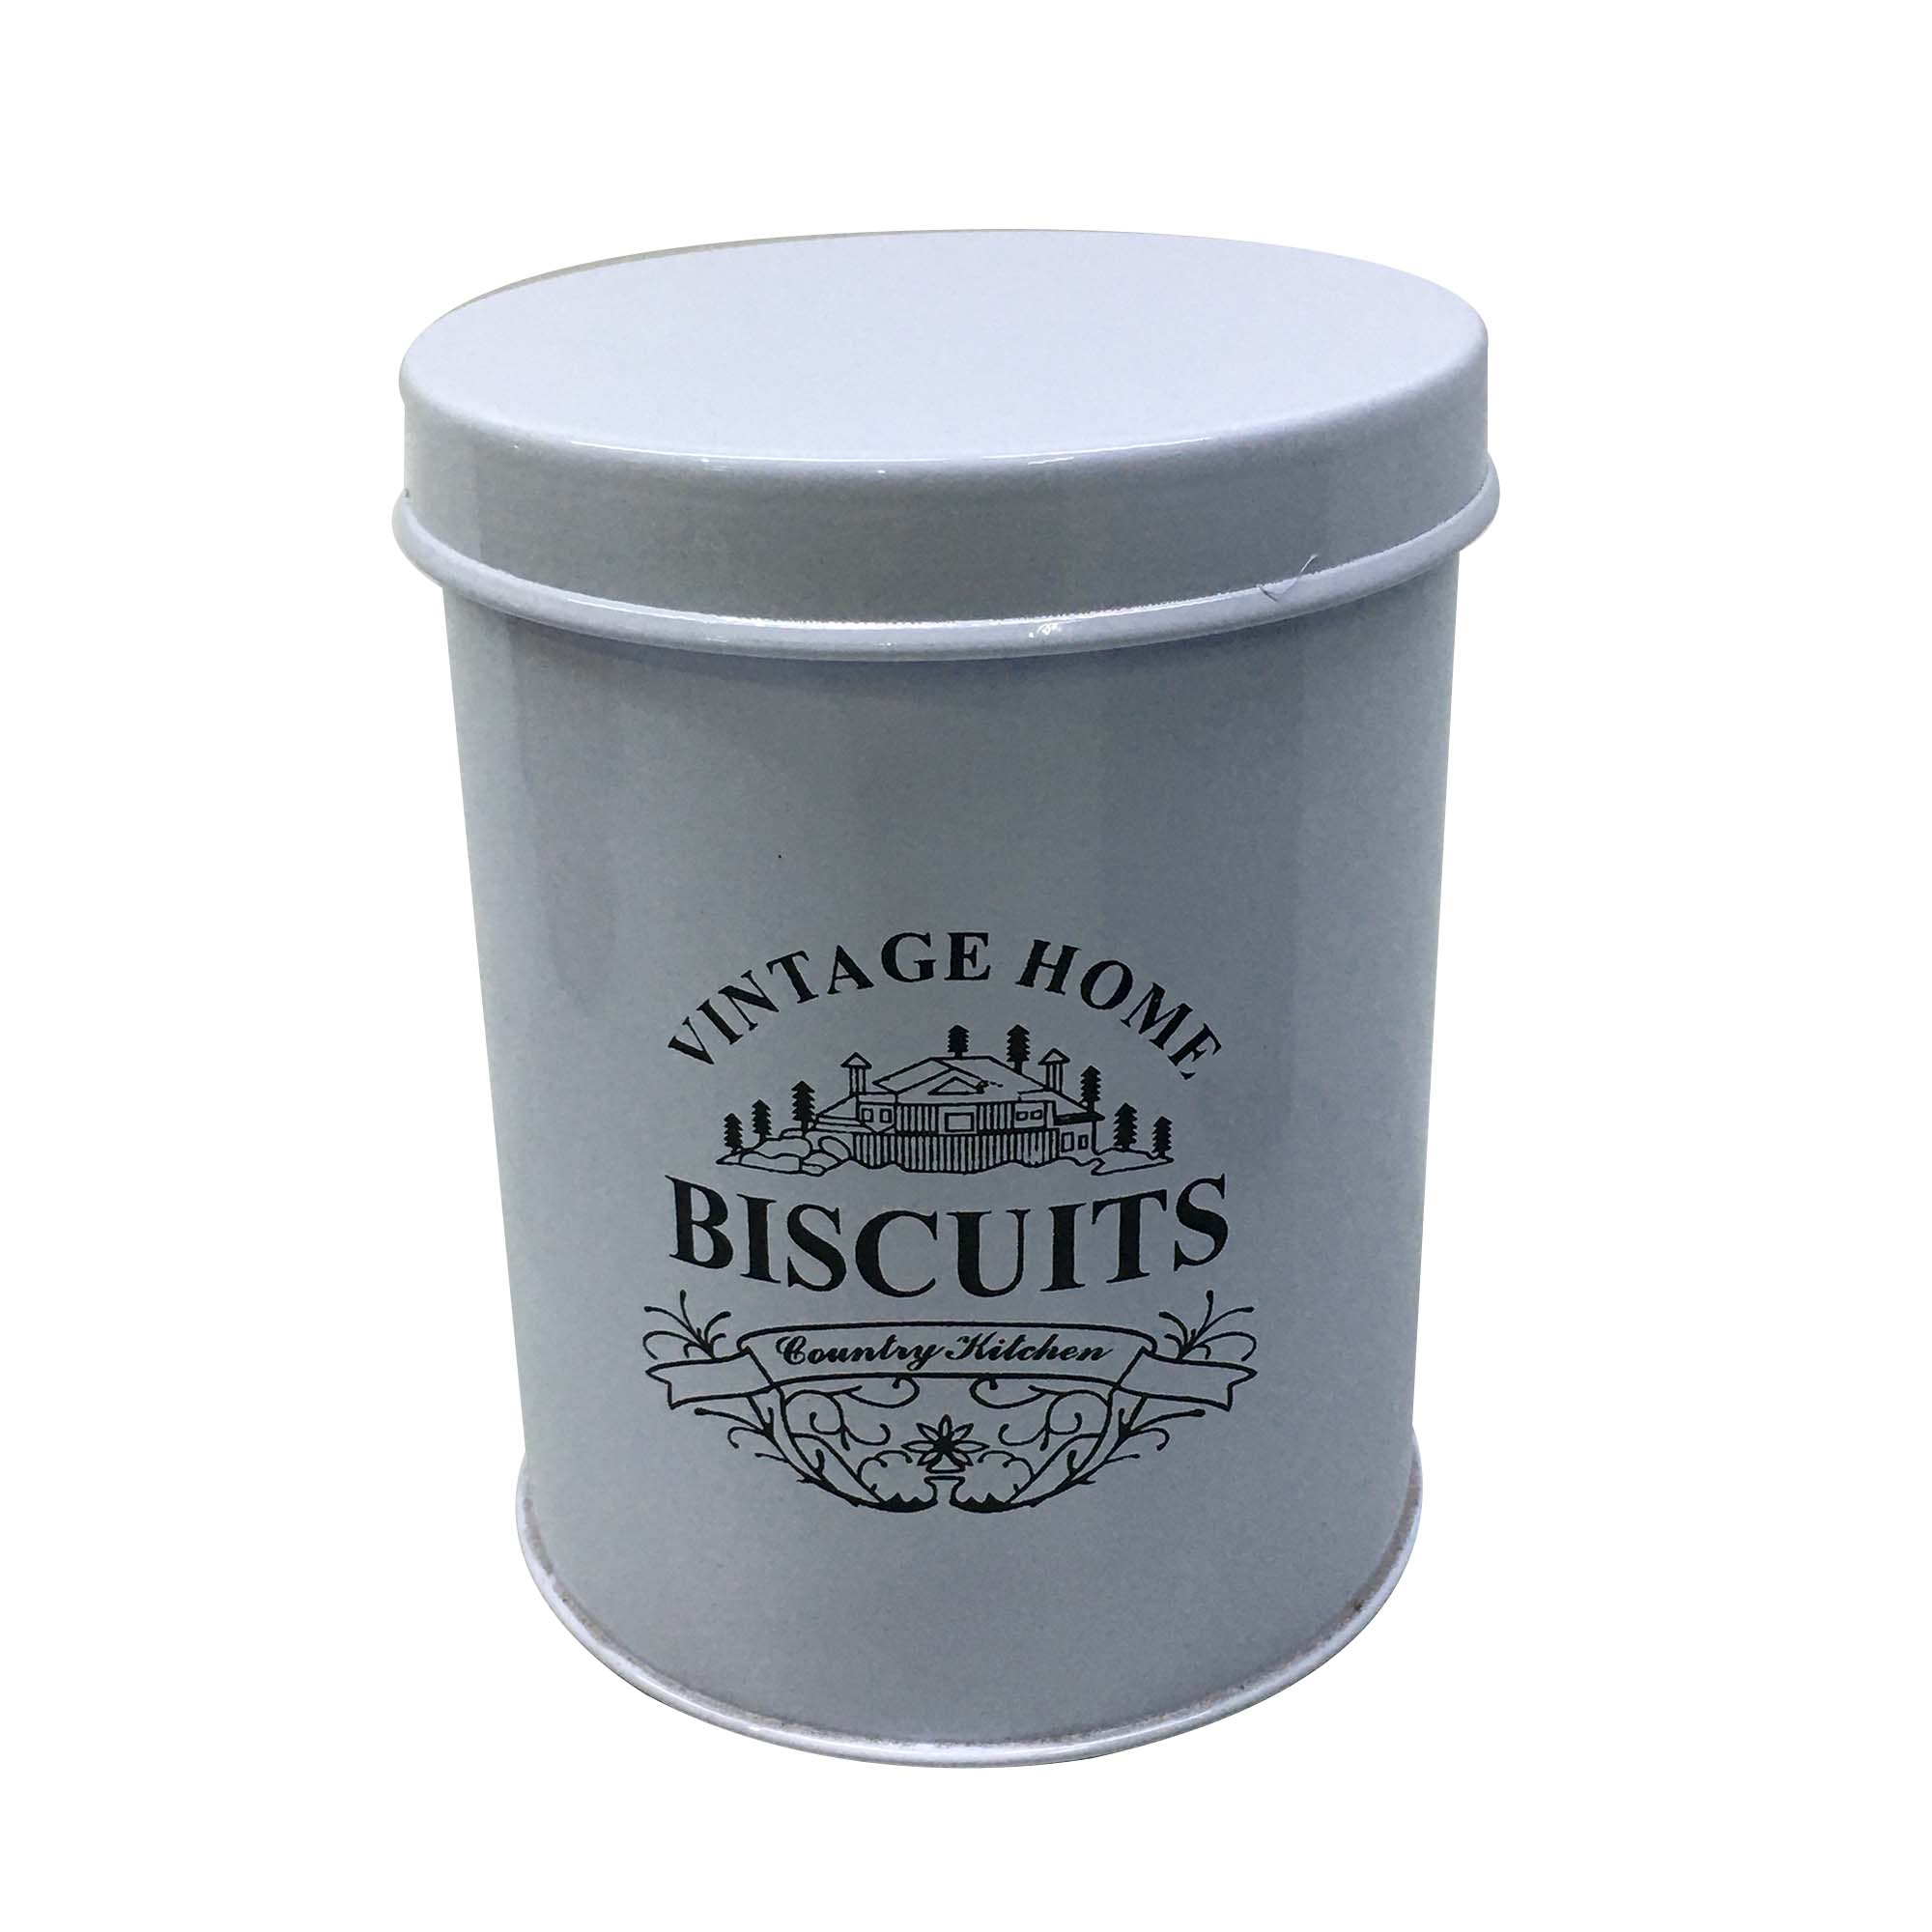 Vintage Tin Biscuit Canister White 12x15cm